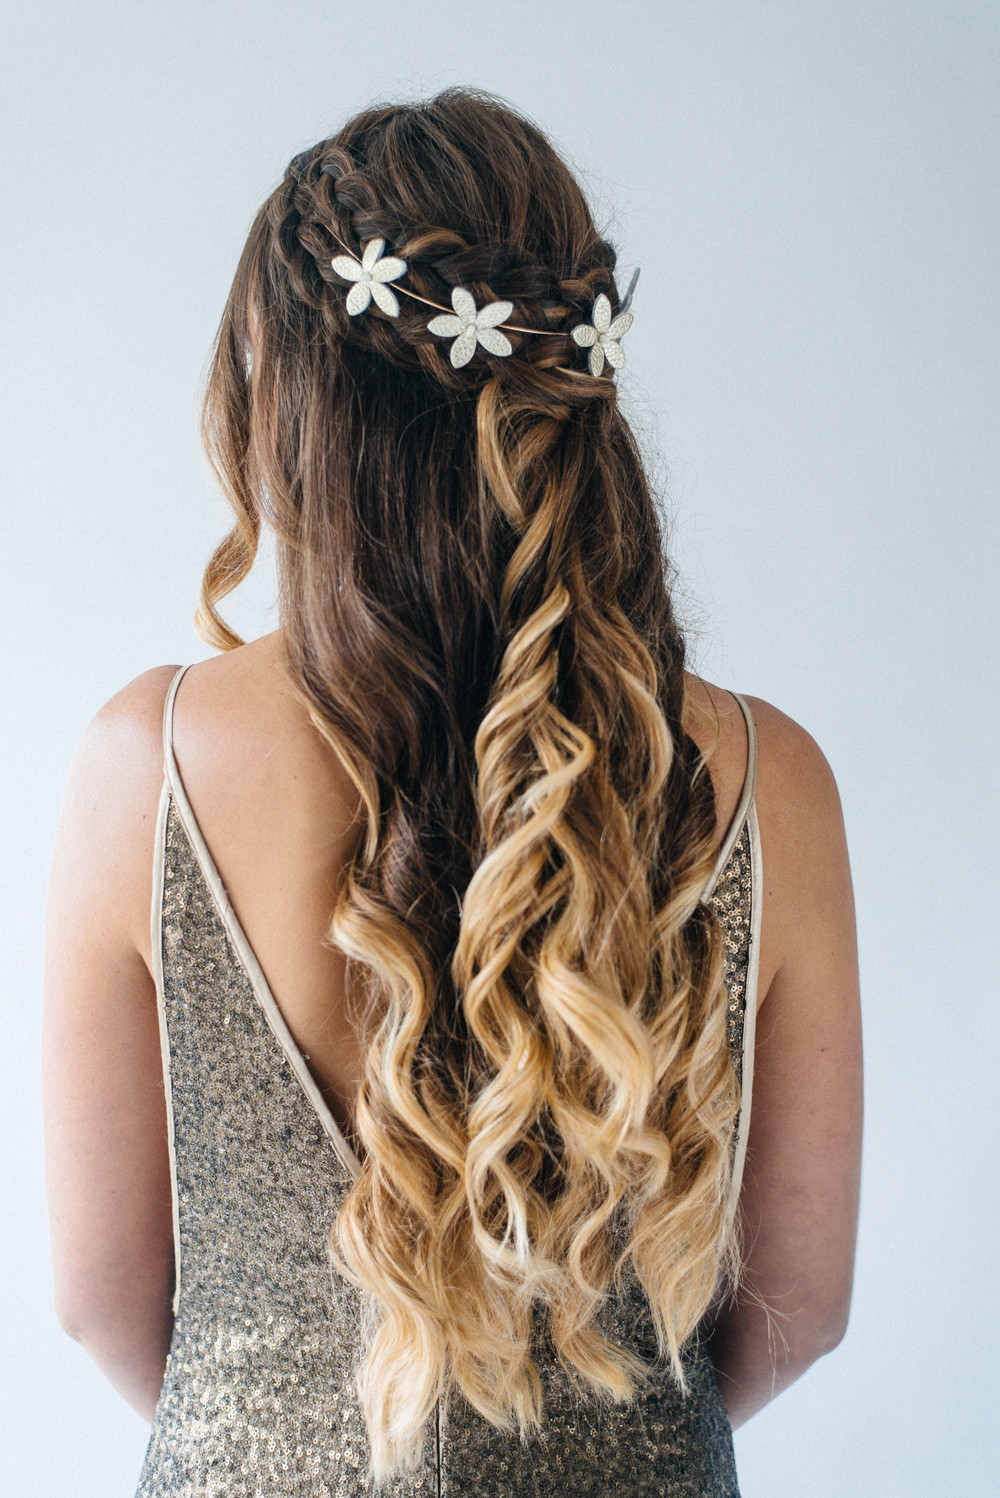 Hair Down Wedding Hairstyles
 Inspiration For Half Up Half Down Wedding Hair With